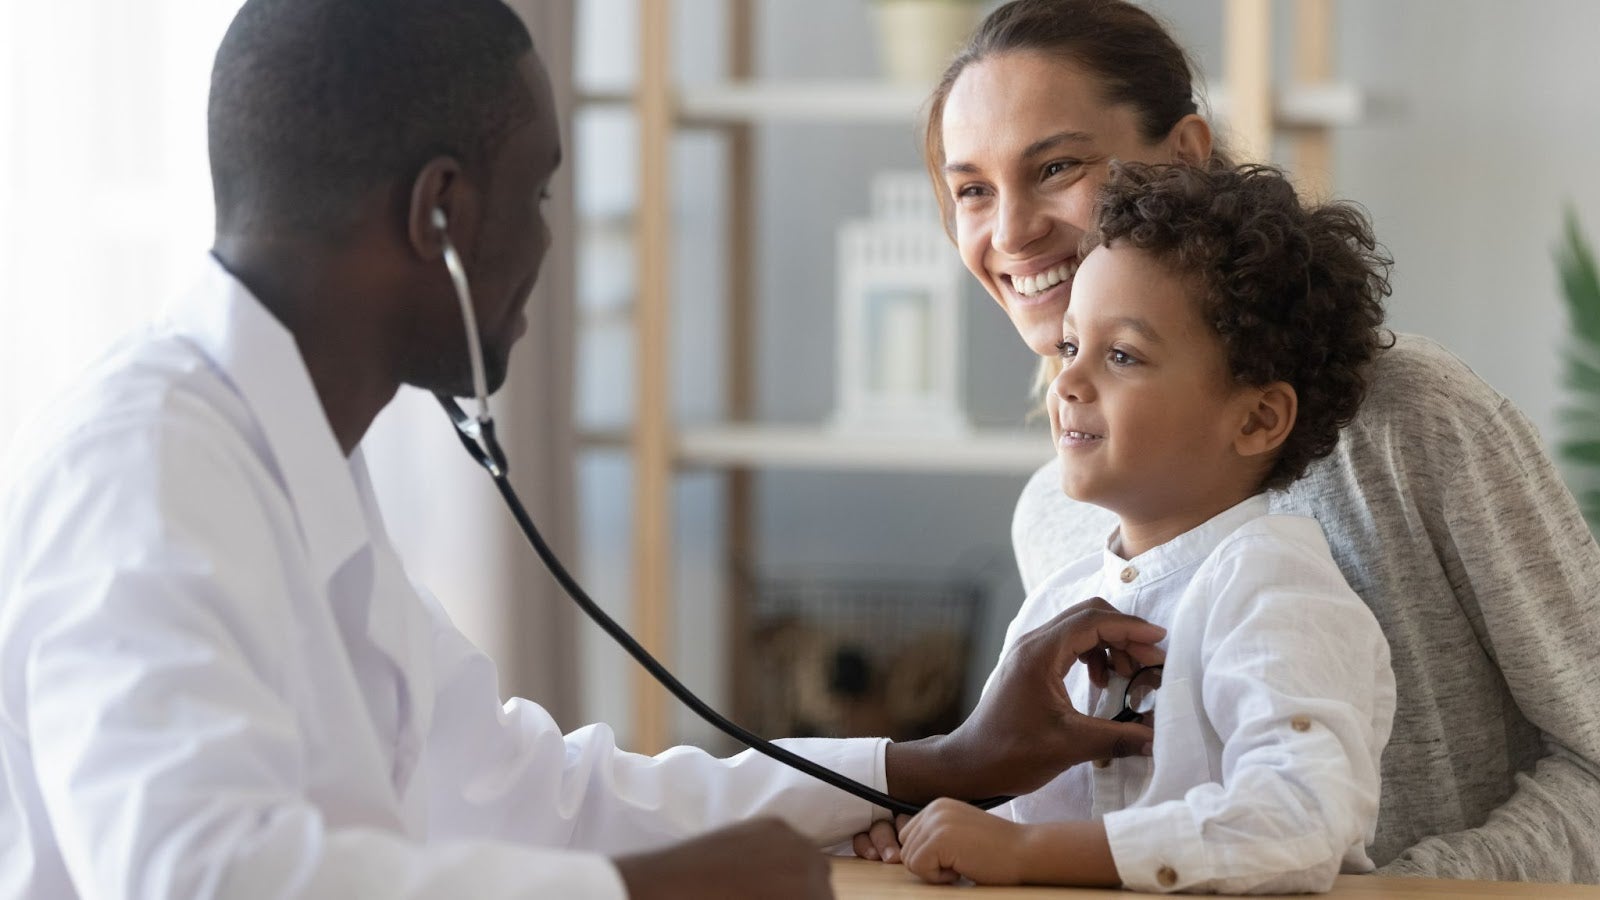 Family Nurse Practitioner listens to heartbeat of a child patient through stethoscope